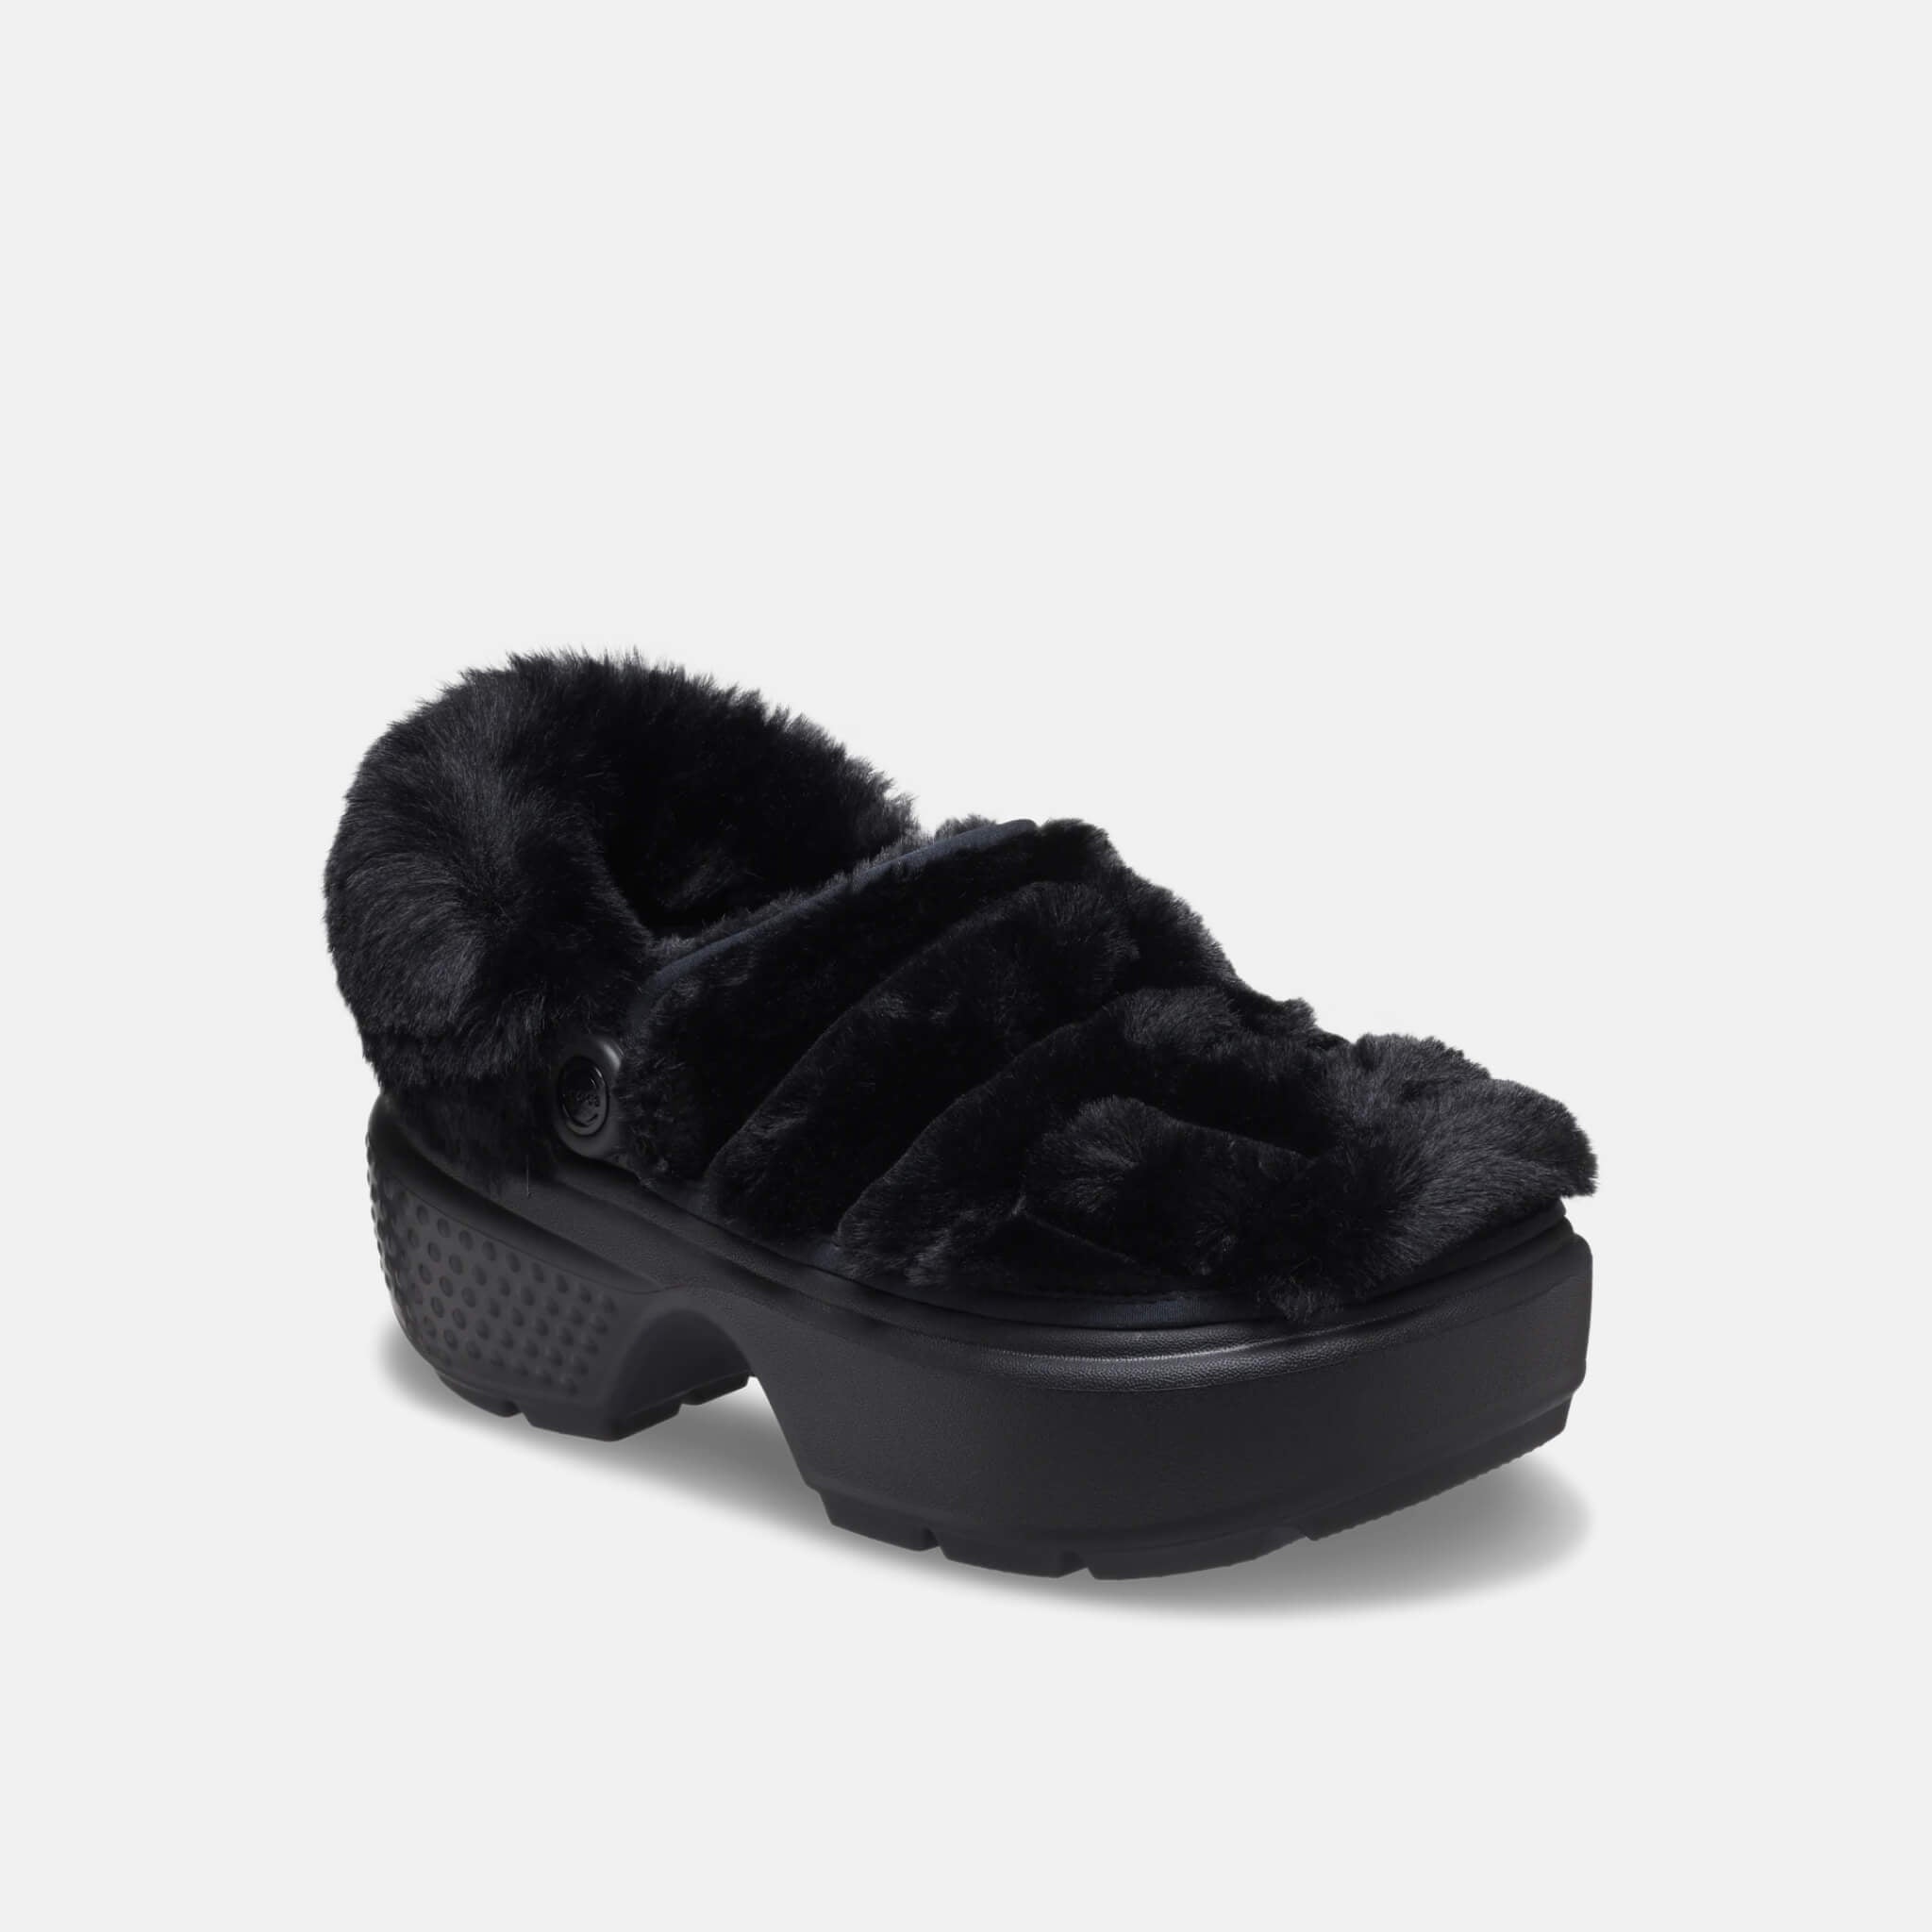 Stomp Lined Quilted Clog Black